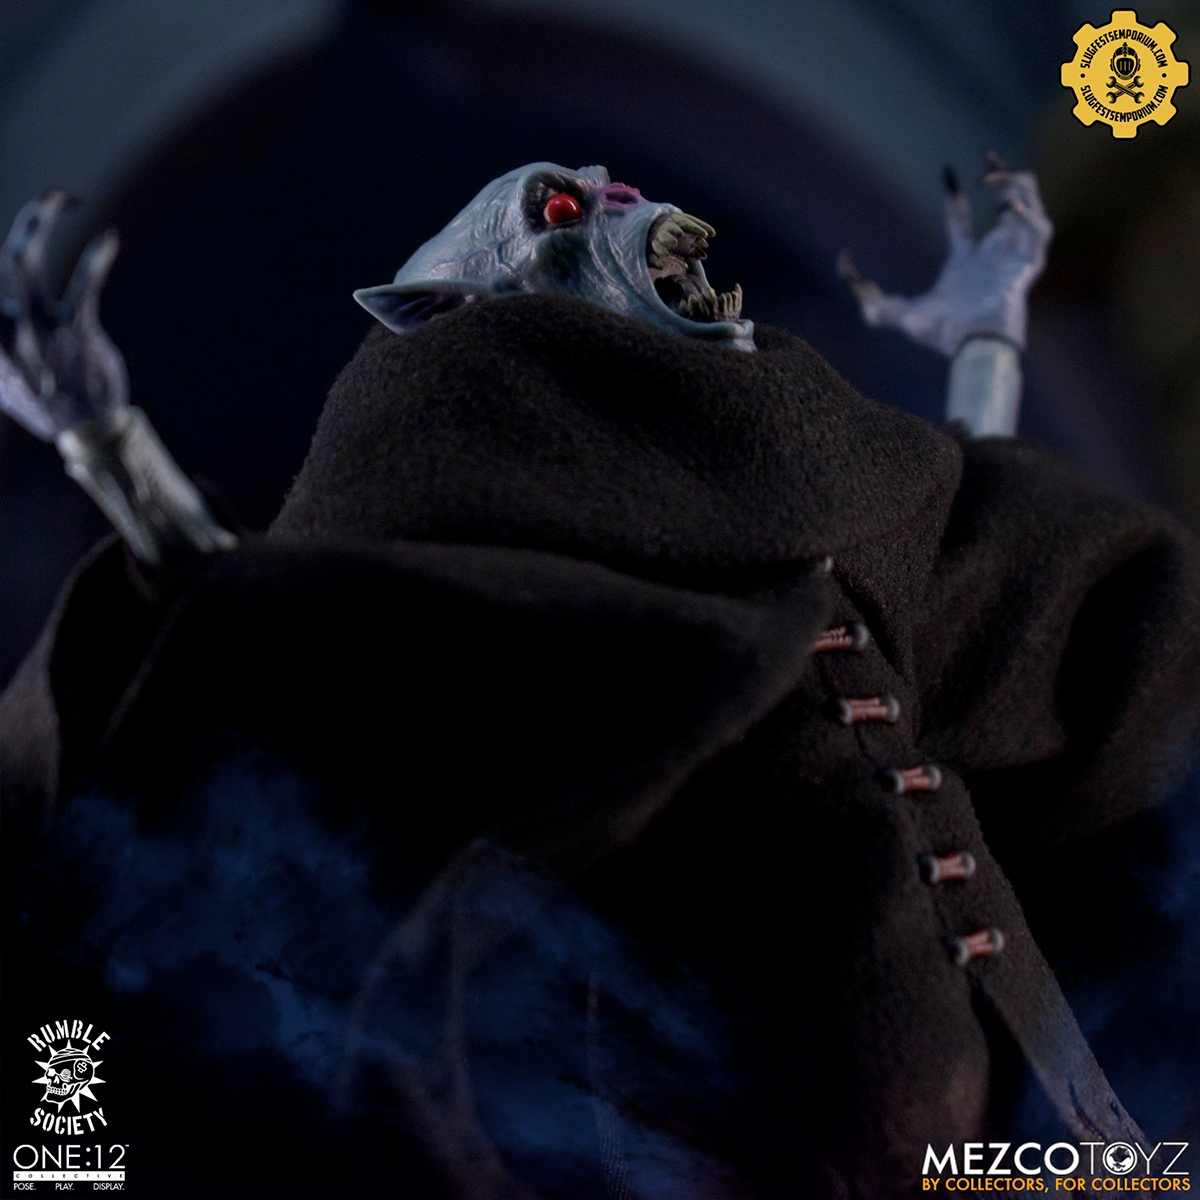 Silent Screamers: Nosferatu - Symphony of Horror Edition One:12 Collective Action Figure